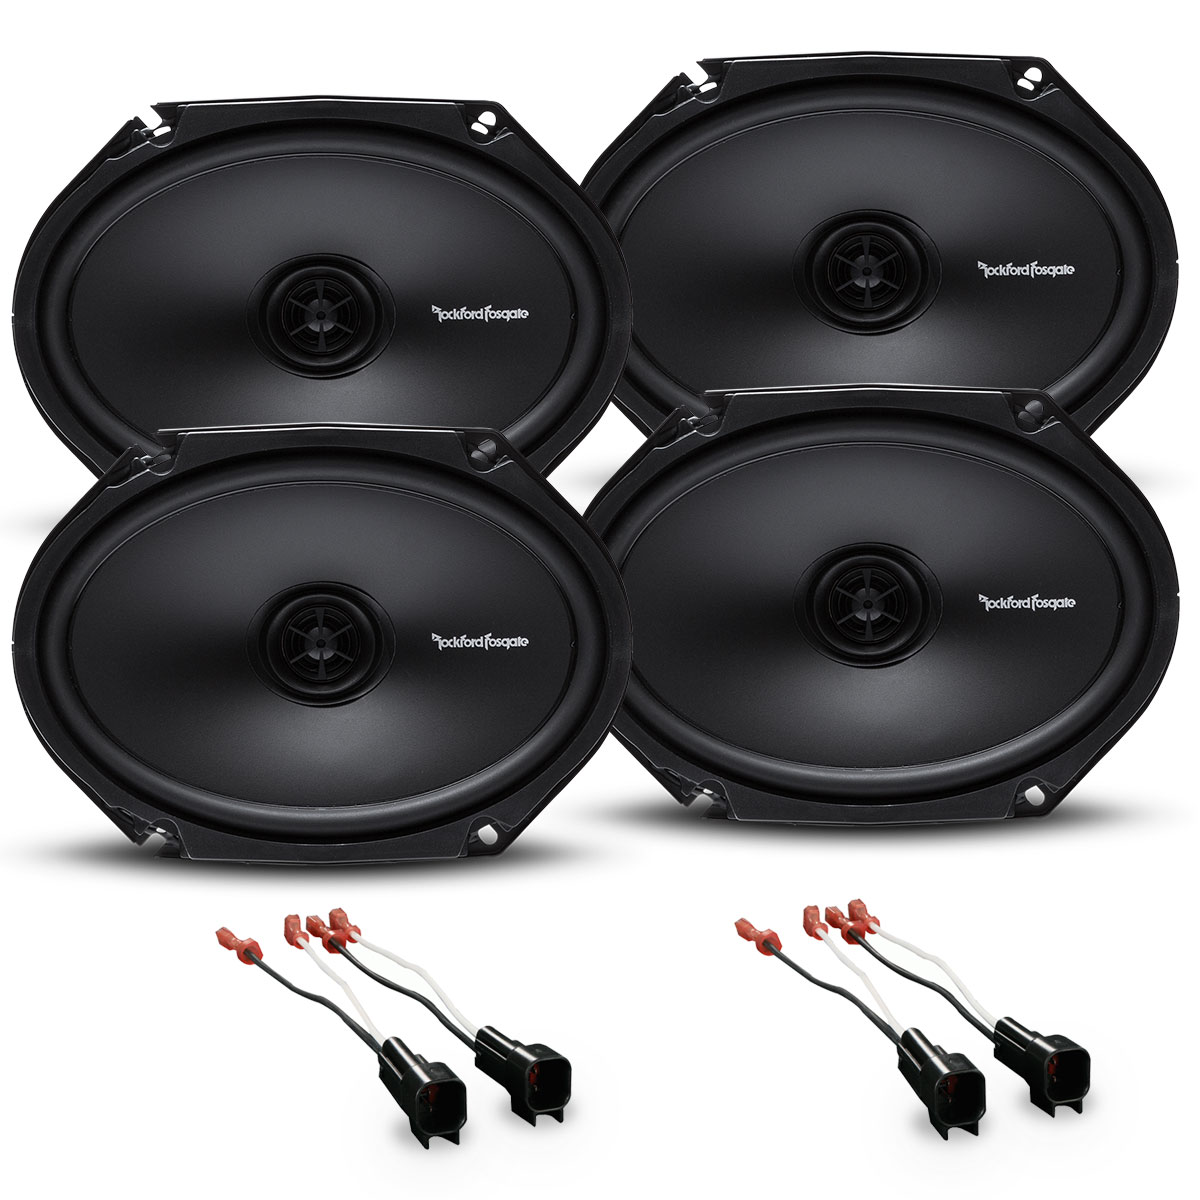 What Size Door Speakers are in a 2012 F150